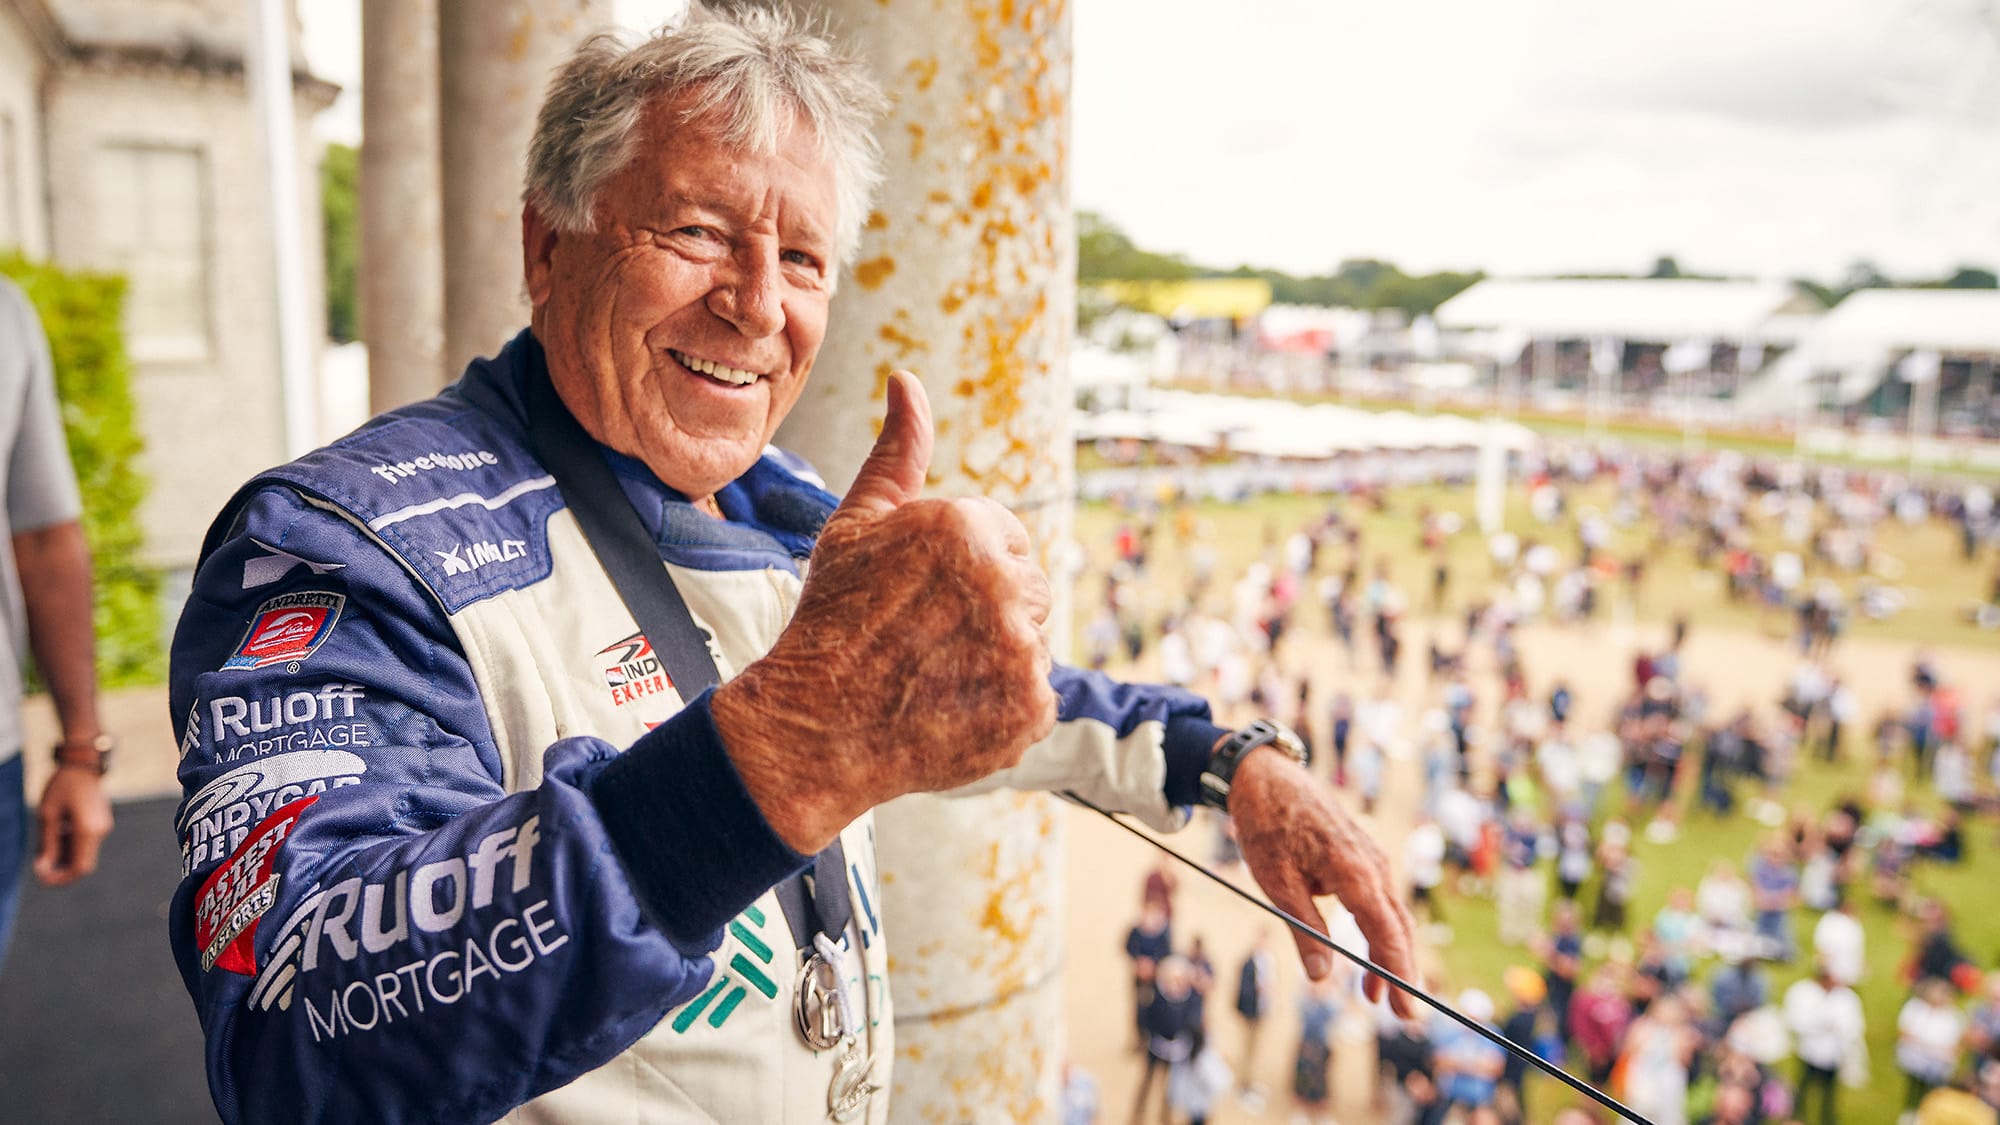 Mario Andretti at the 2021 Goodwood Festival of Speed